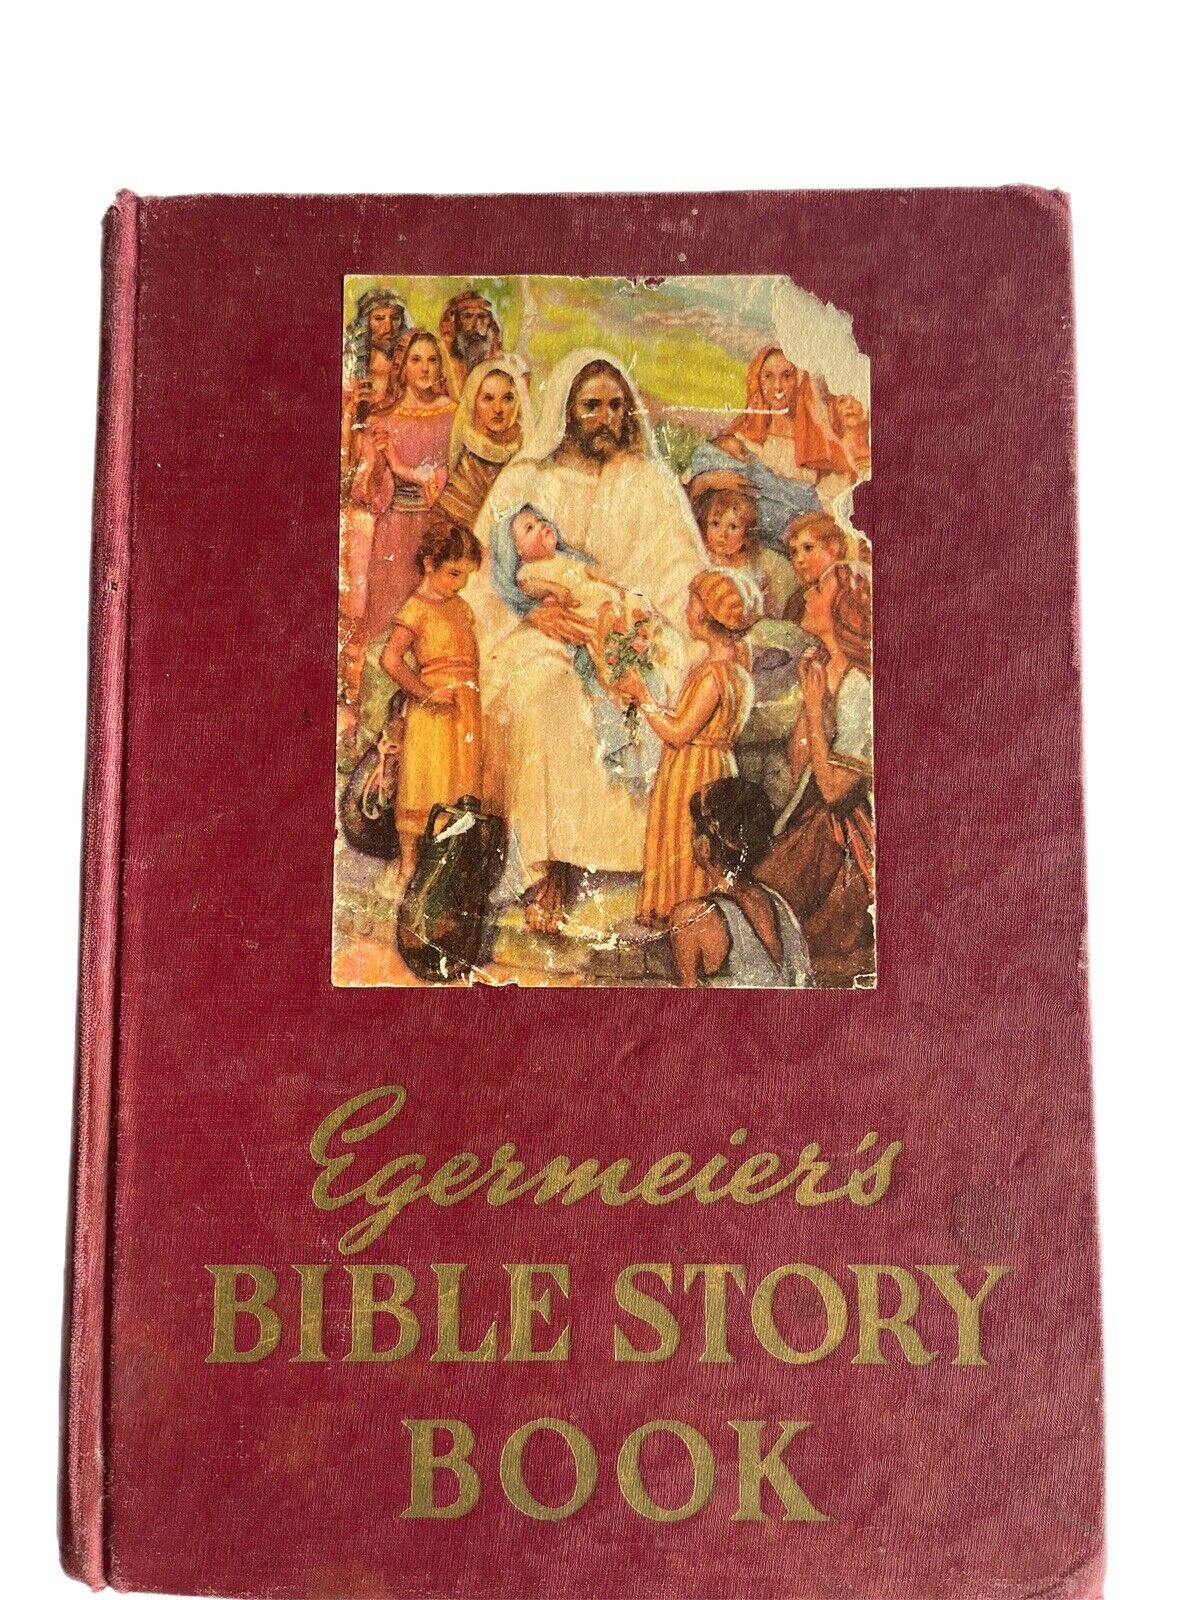 Egermeier's Bible Story Book pictures and maps Warner Press illustrated 1947